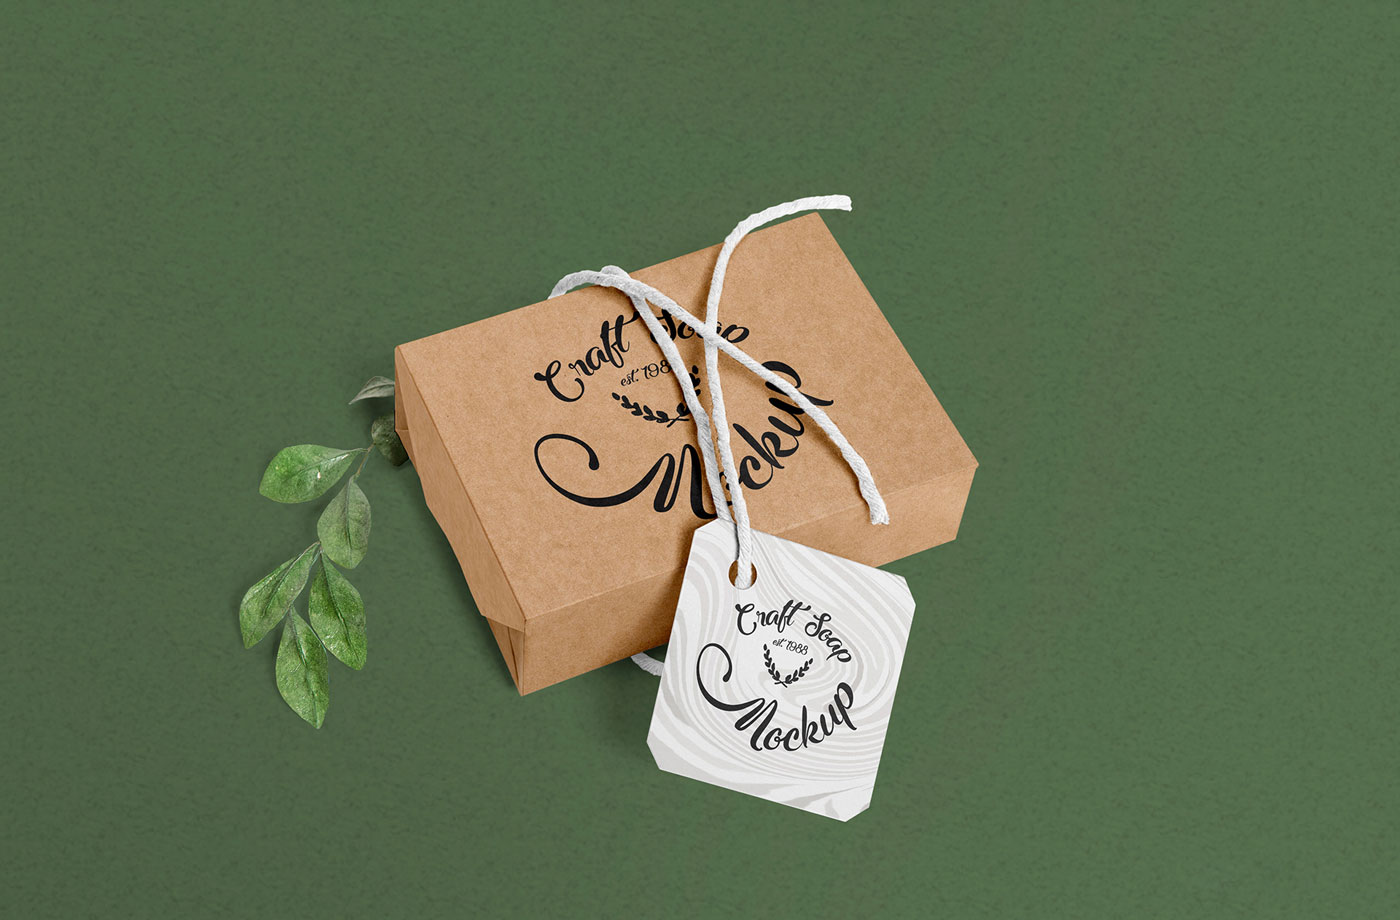 Download Craft Homemade Product Box Mockup Free Package Mockups